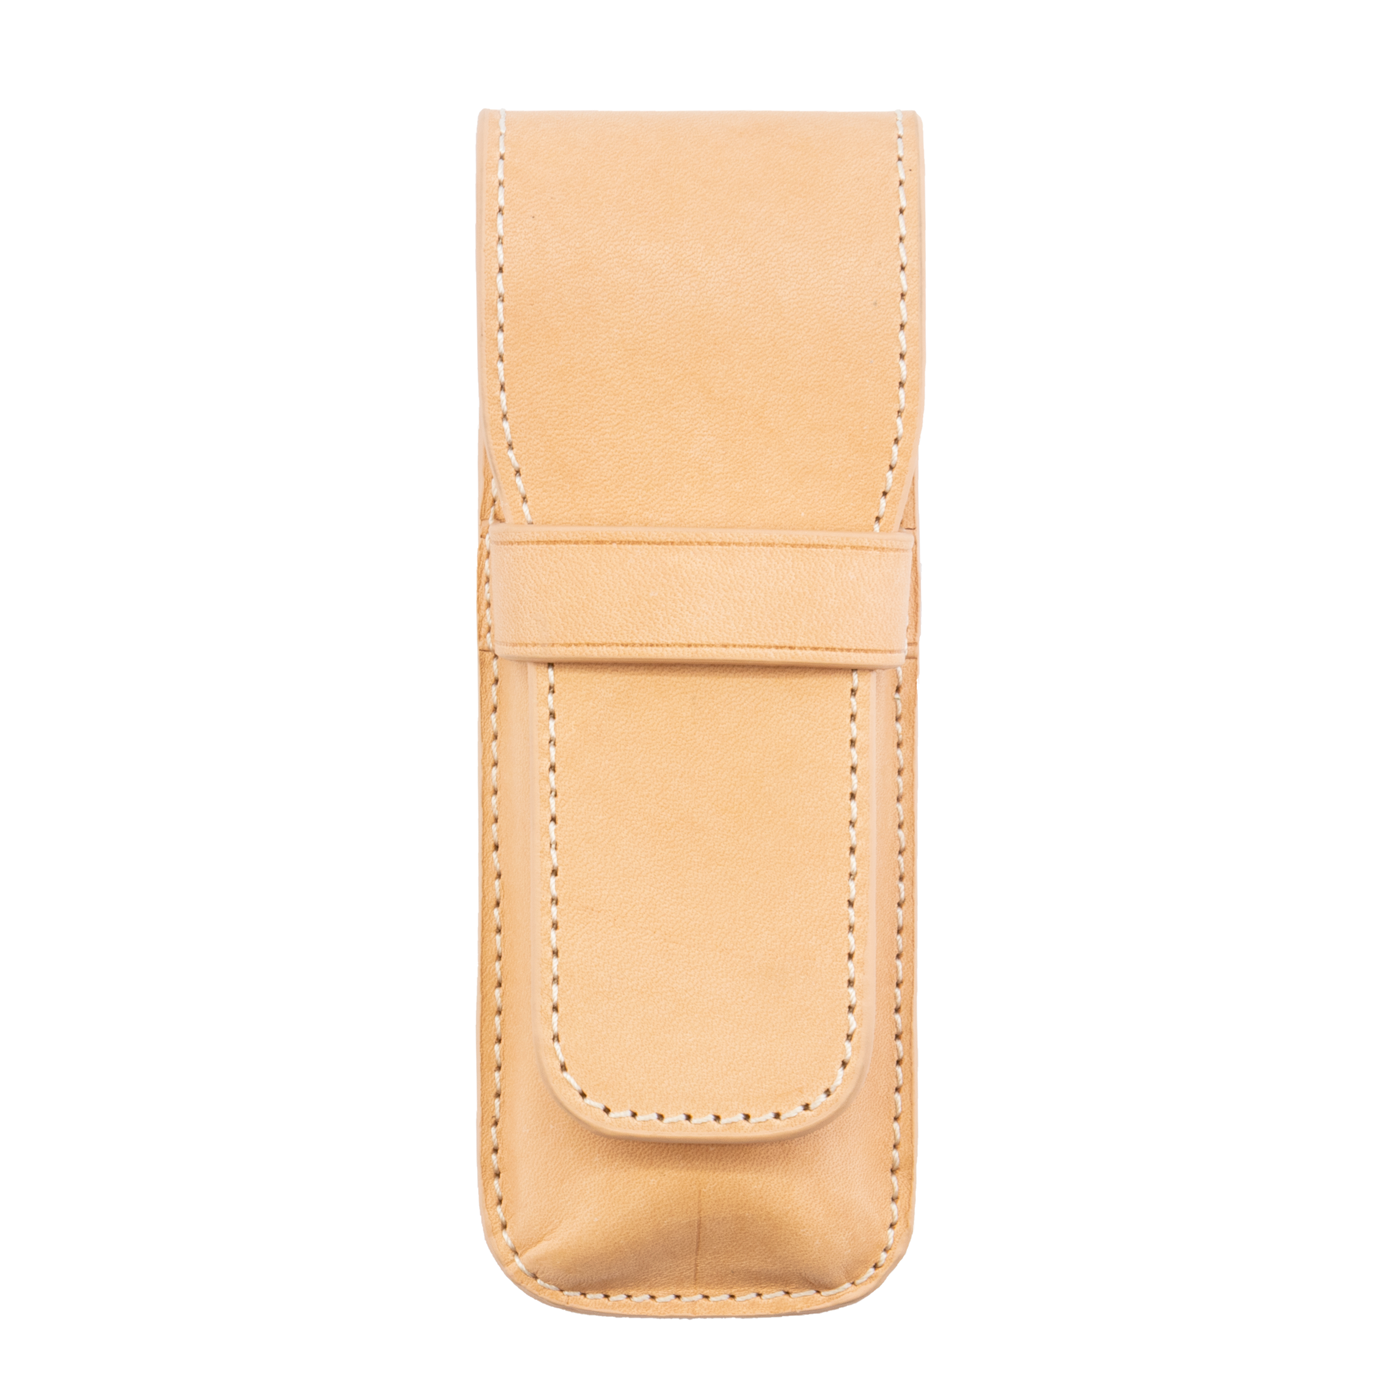 Galen Leather Co. Flap Pen Case for 2 Pens - Undyed Leather